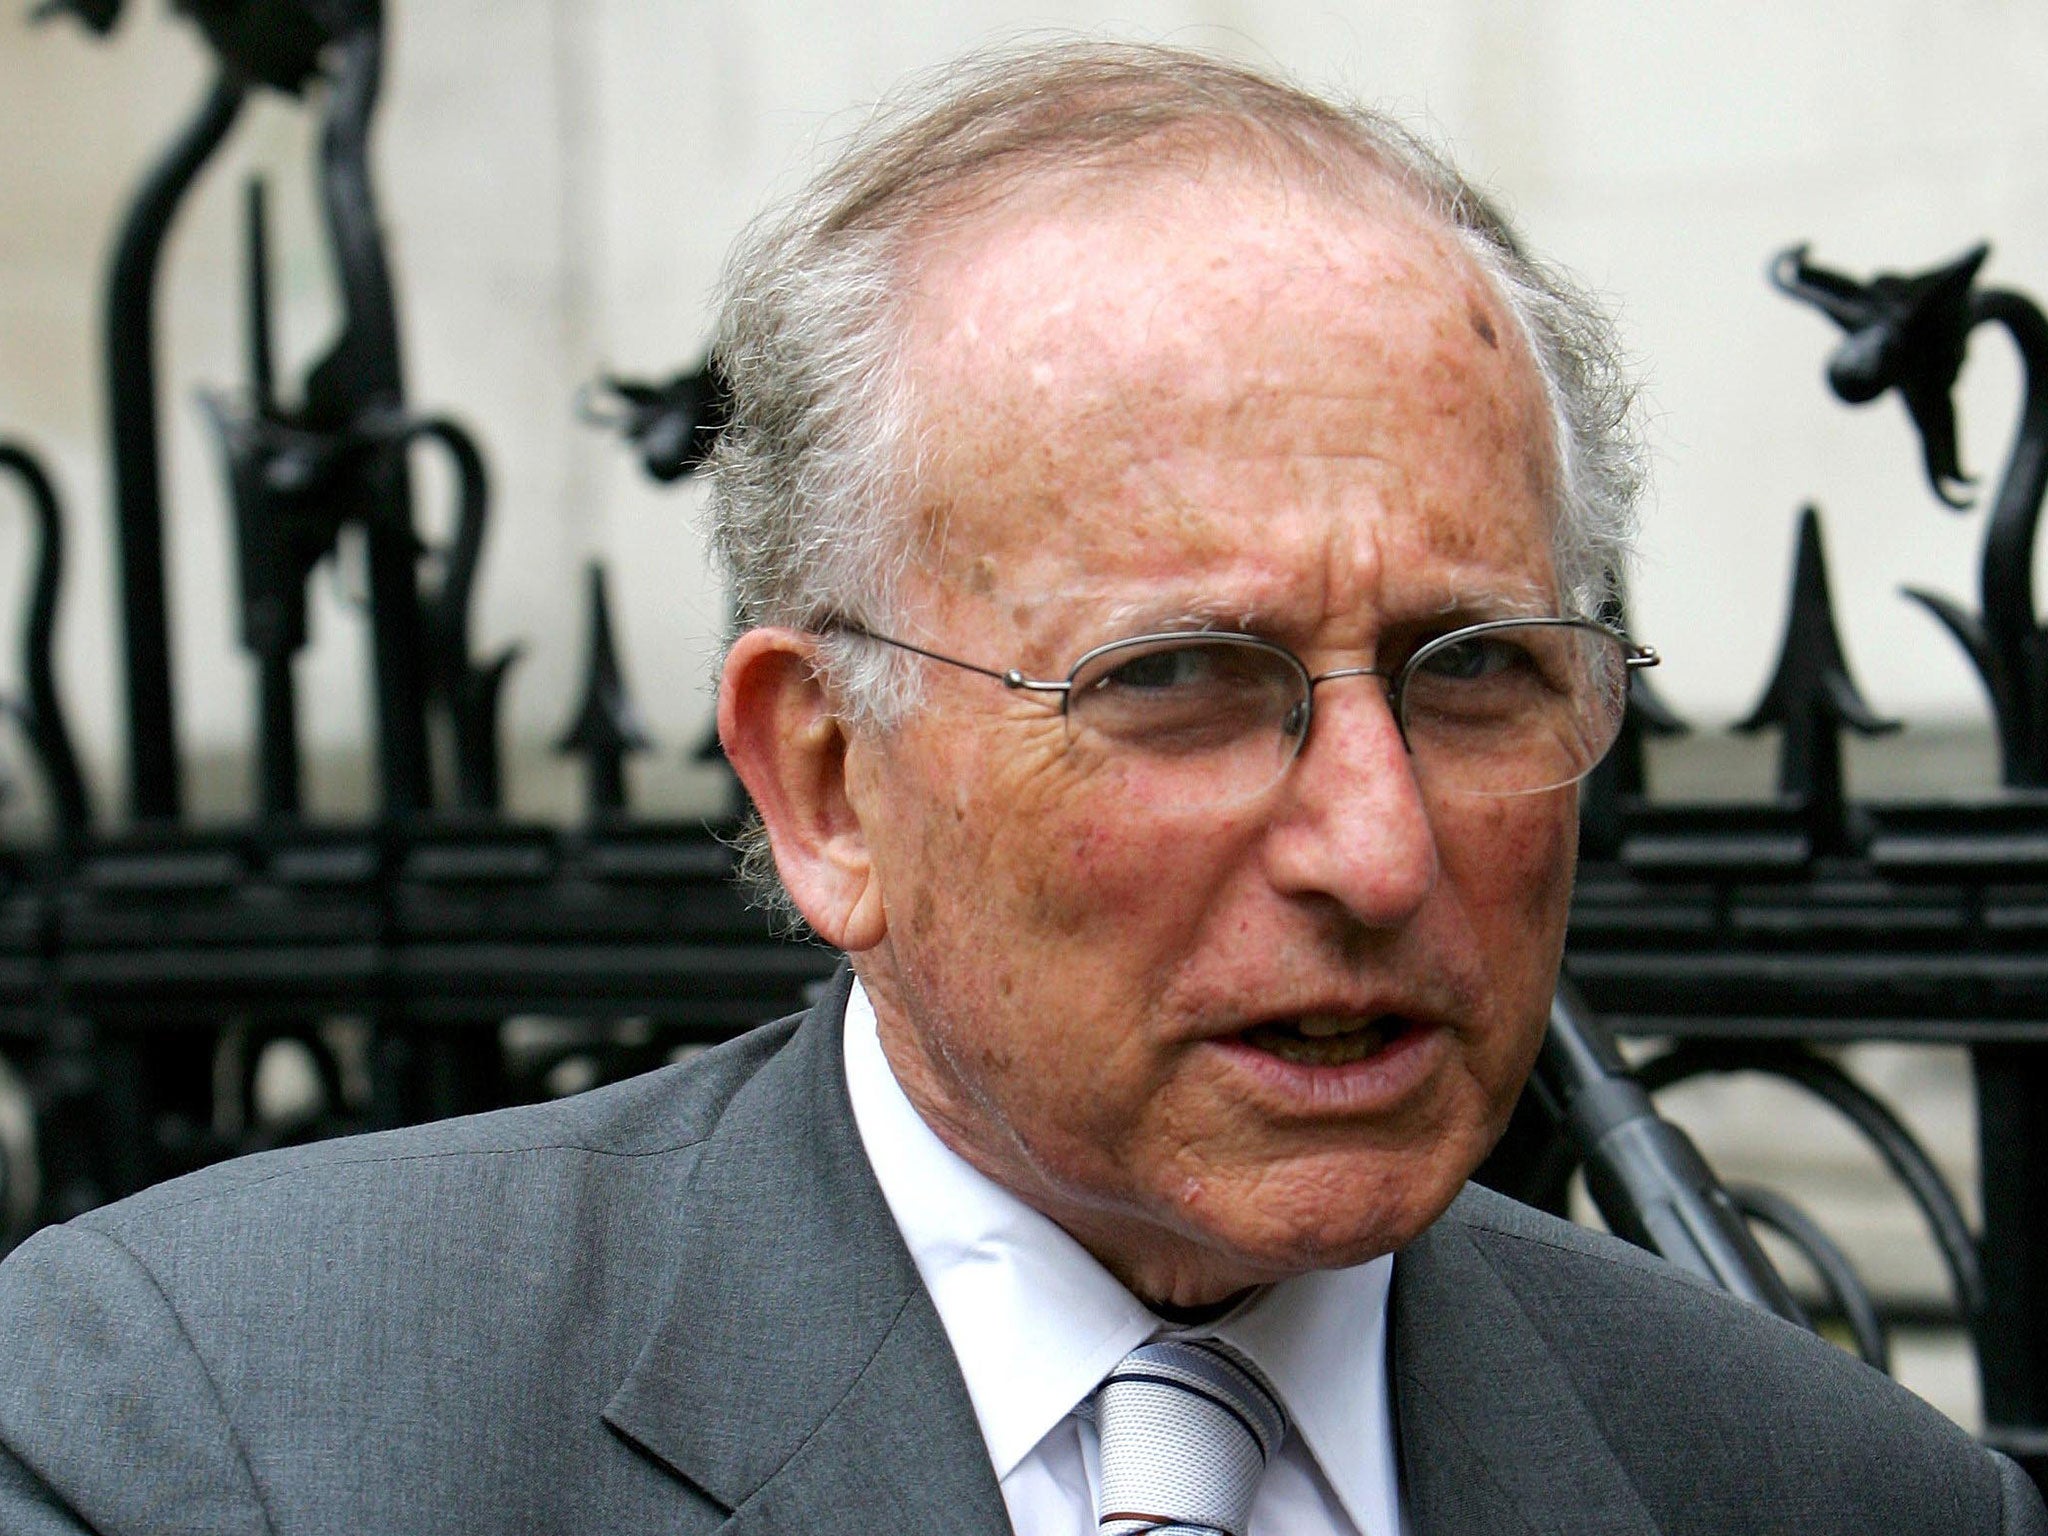 Six alleged victims of child abuse will press ahead with a legal claim for compensation after the death of the Labour peer Lord Janner